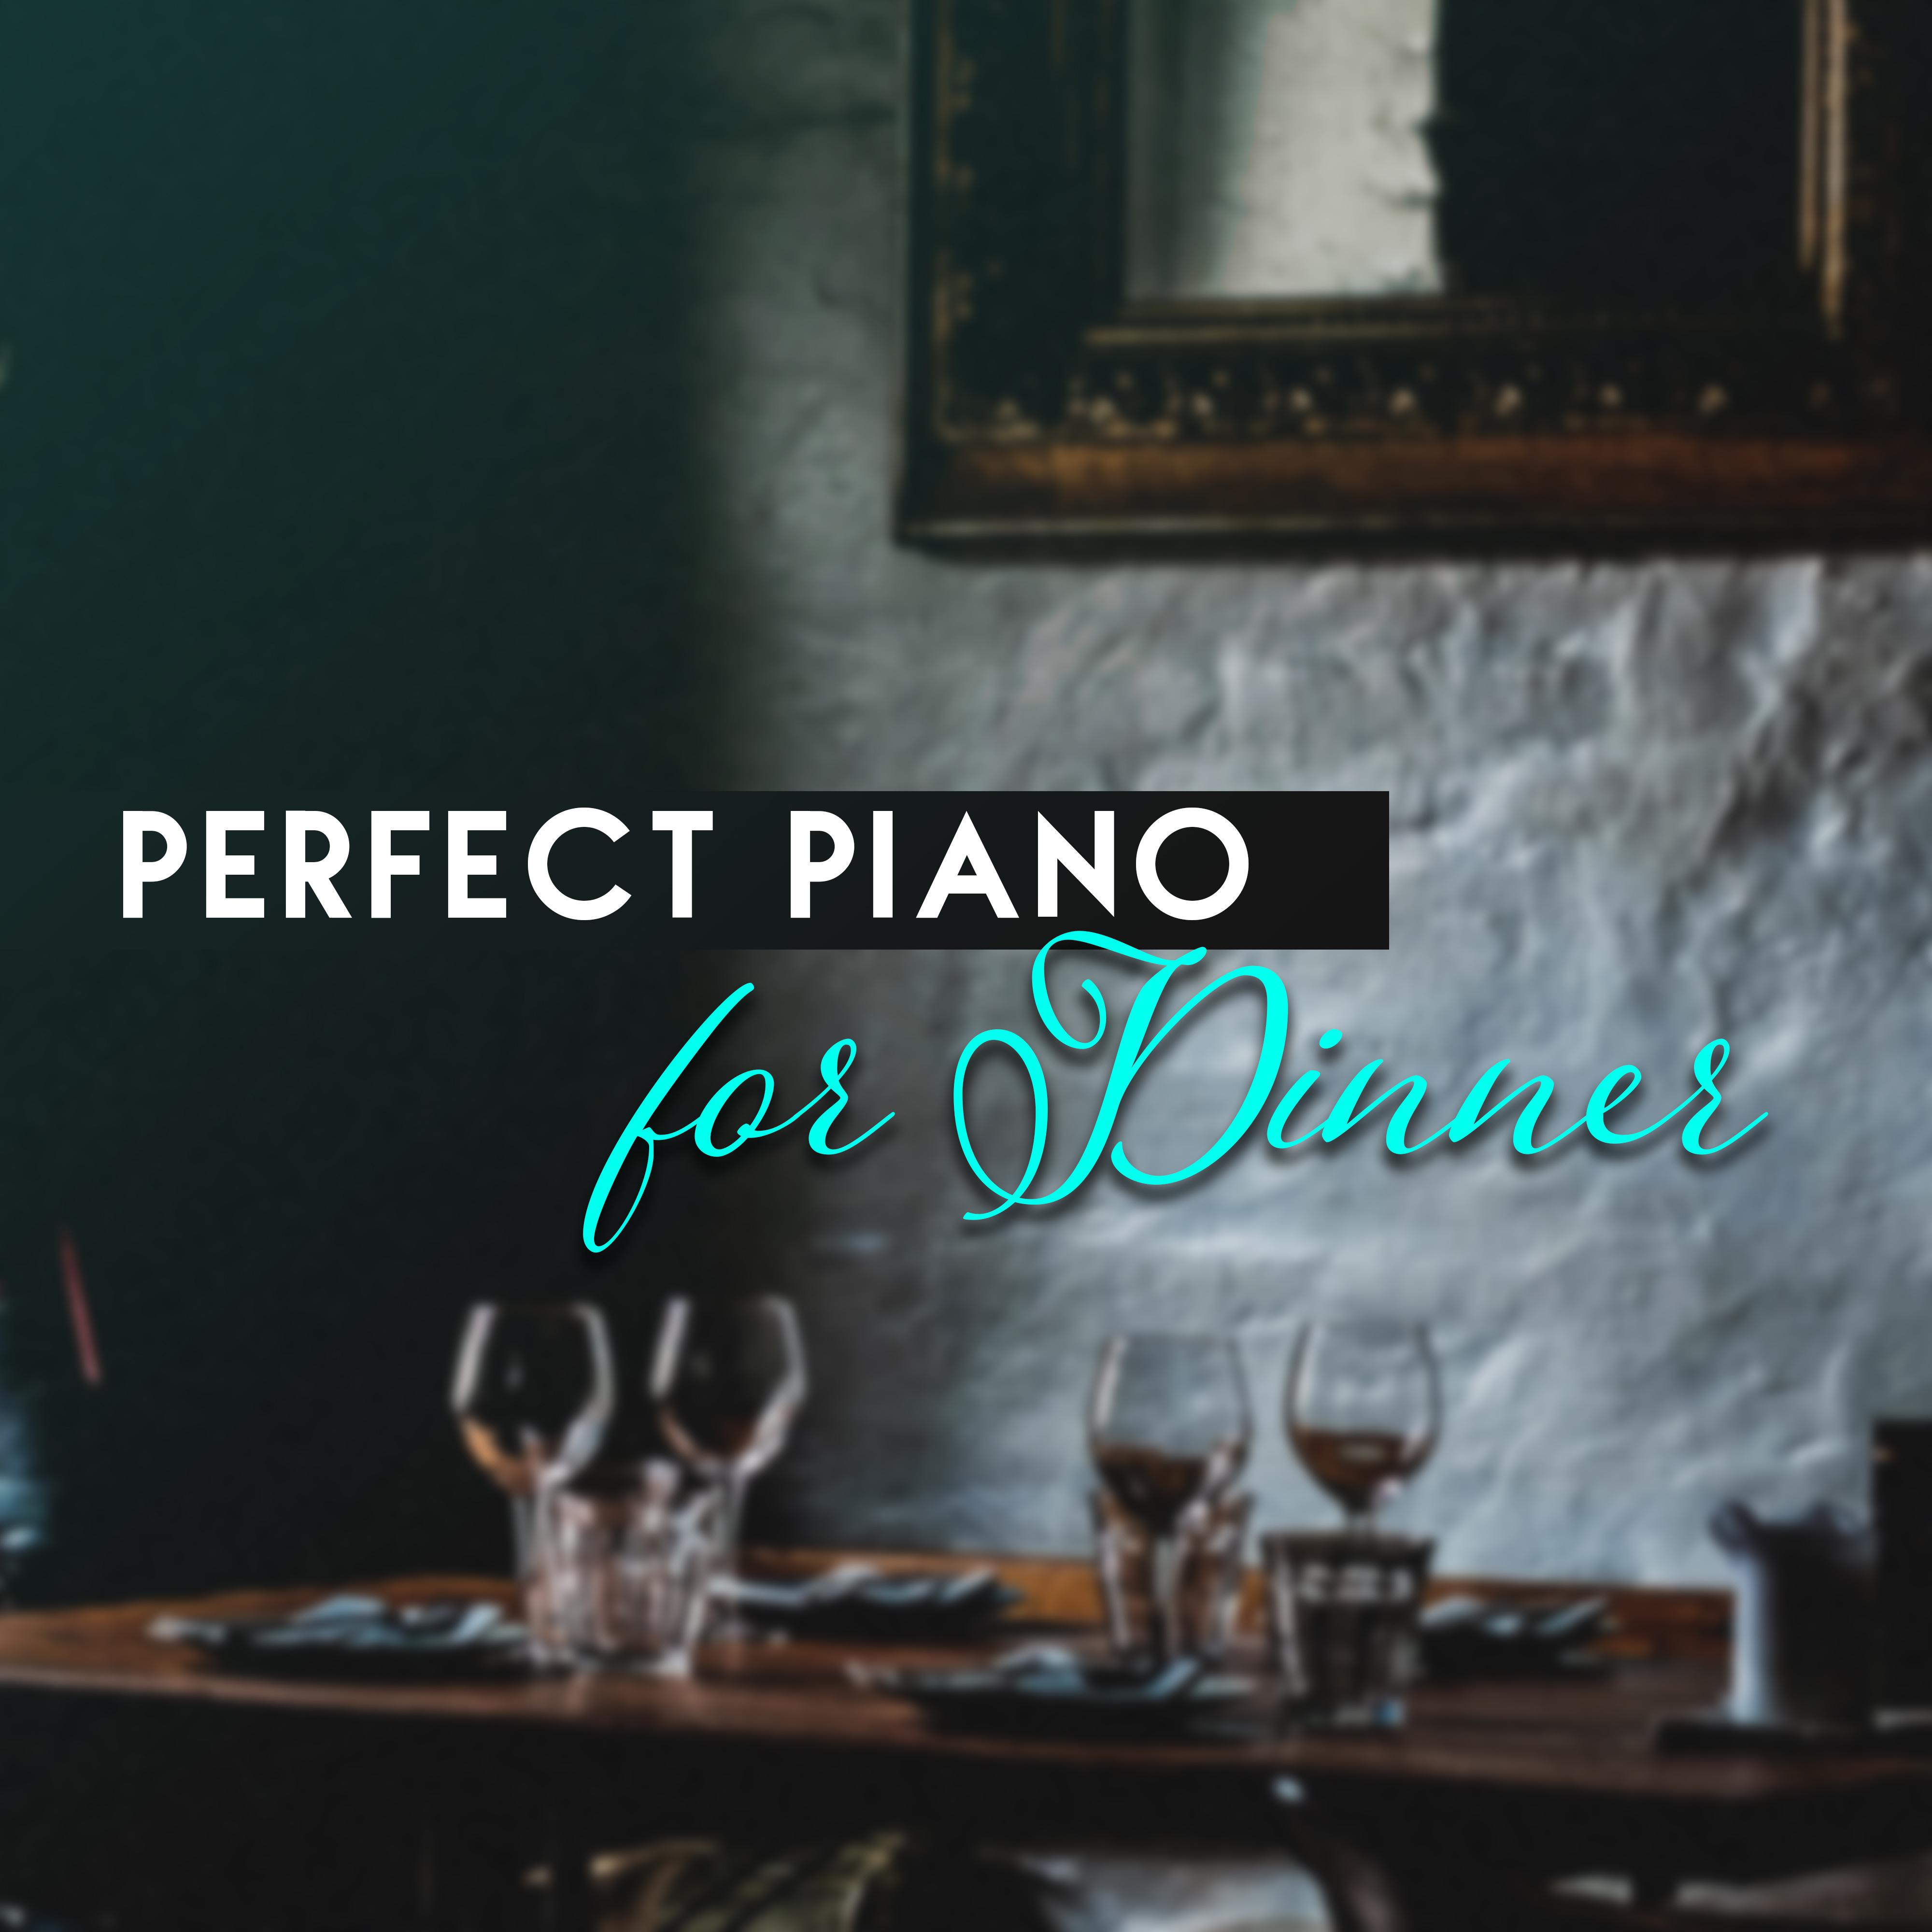 Perfect Piano for Dinner